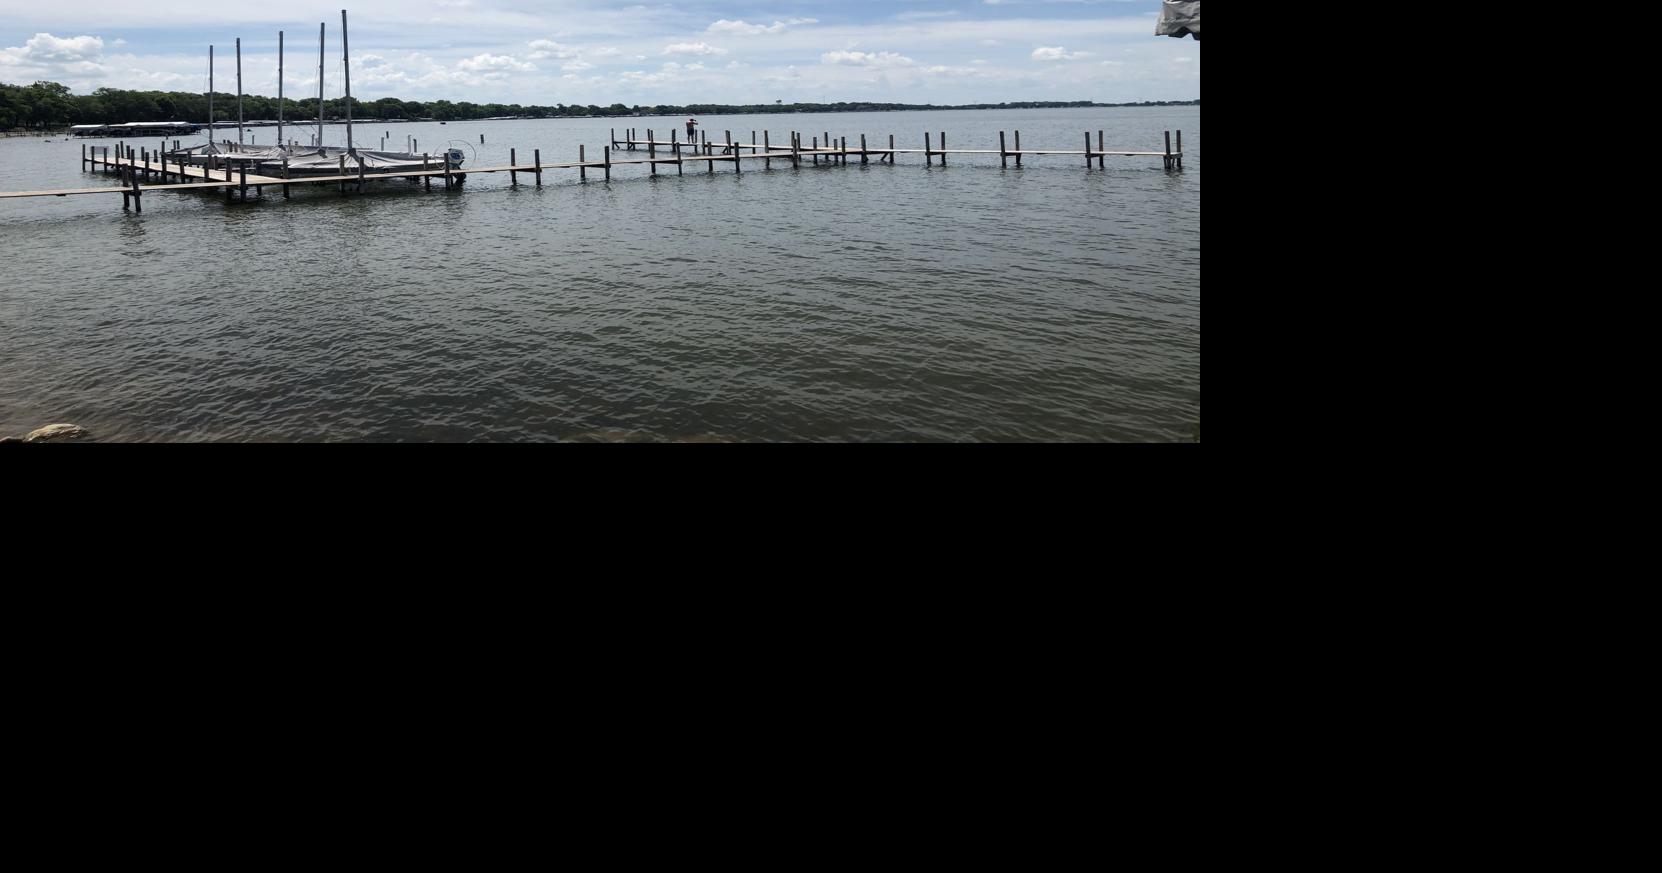 Clear Lake water levels 'not a concern'